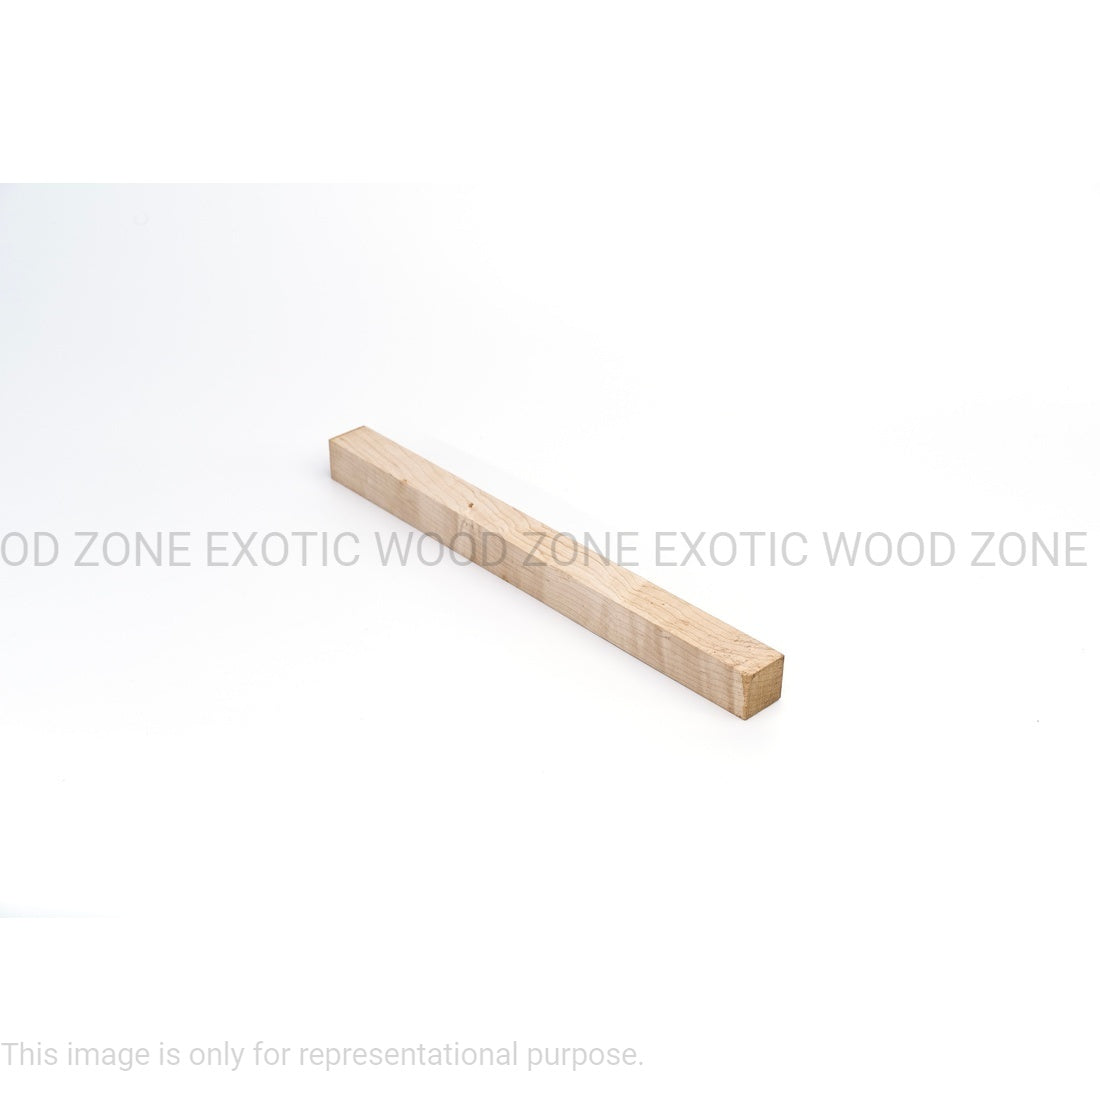 Hard Maple Hobbywood Blank 1&quot; x 1&quot; x 12&quot; inches Exotic Wood Zone